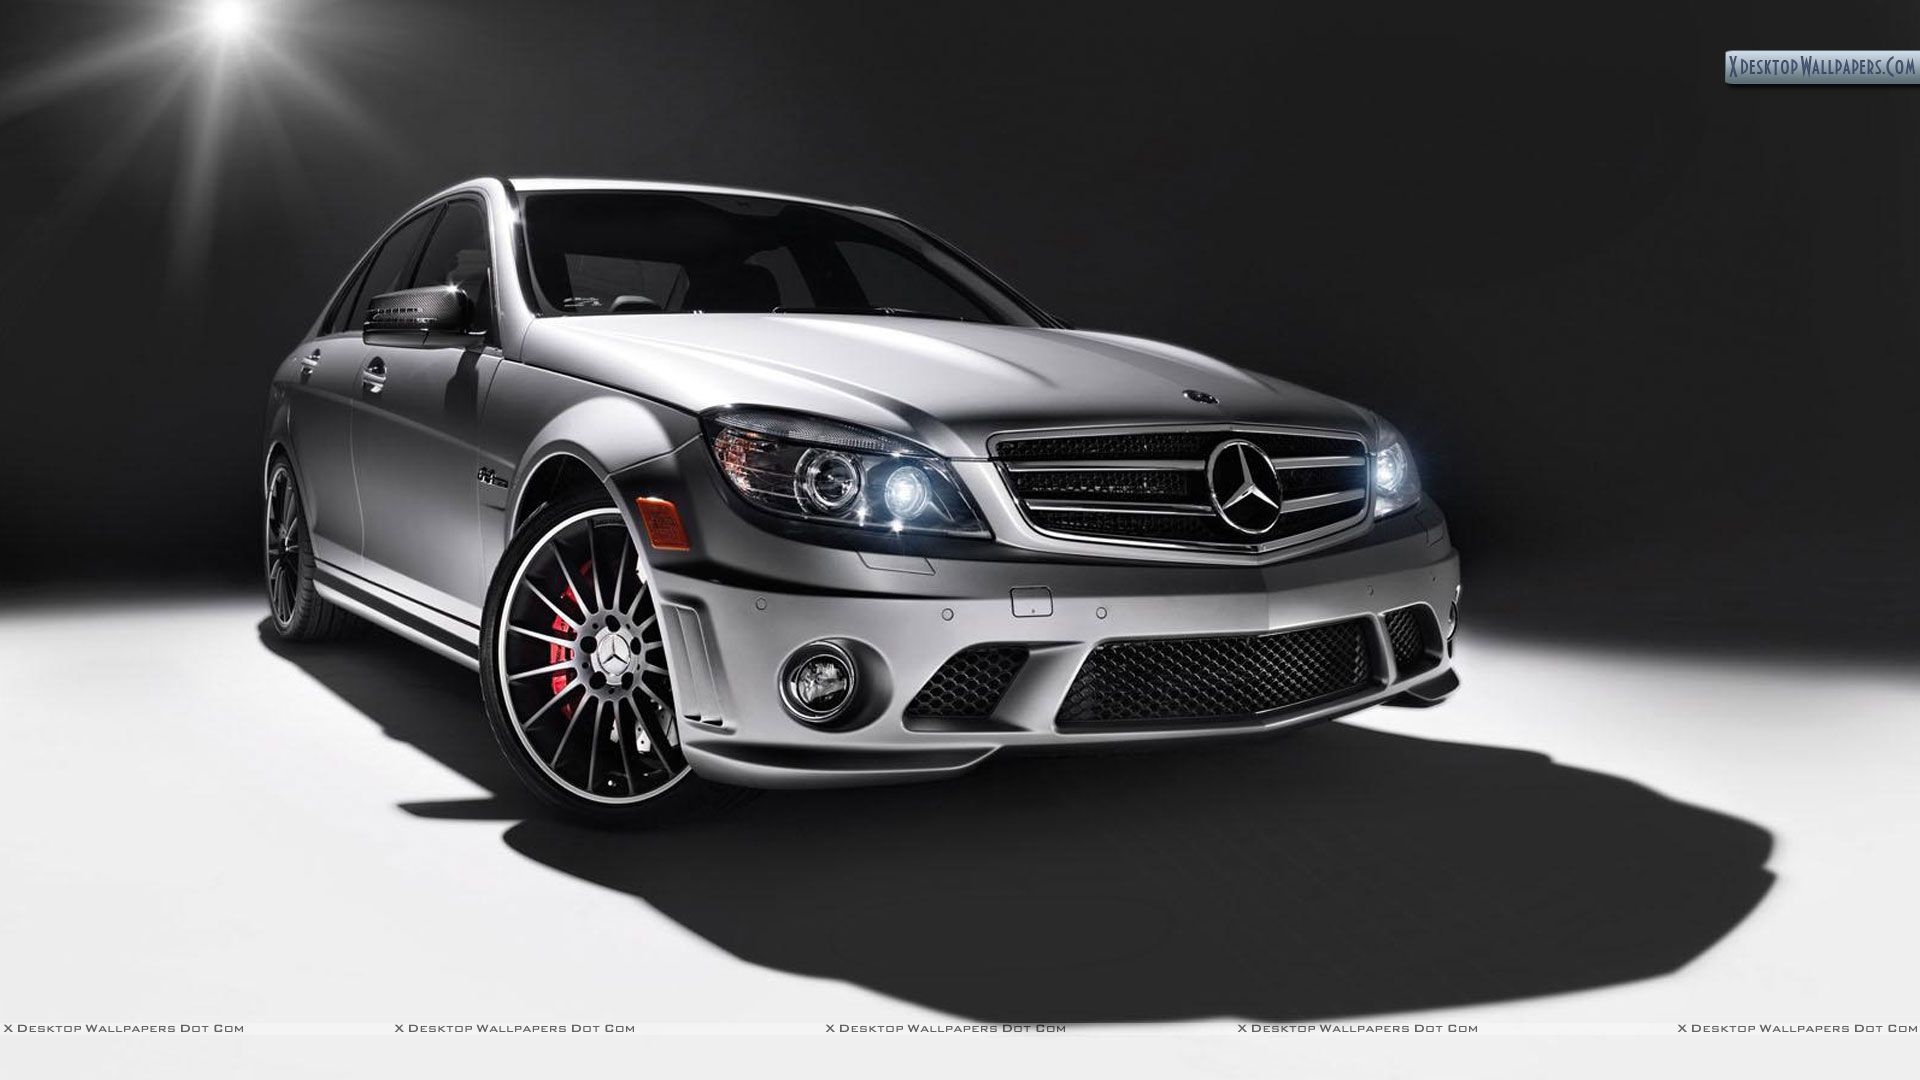 Mercedes Benz C63 Wallpapers Photos Images in HD